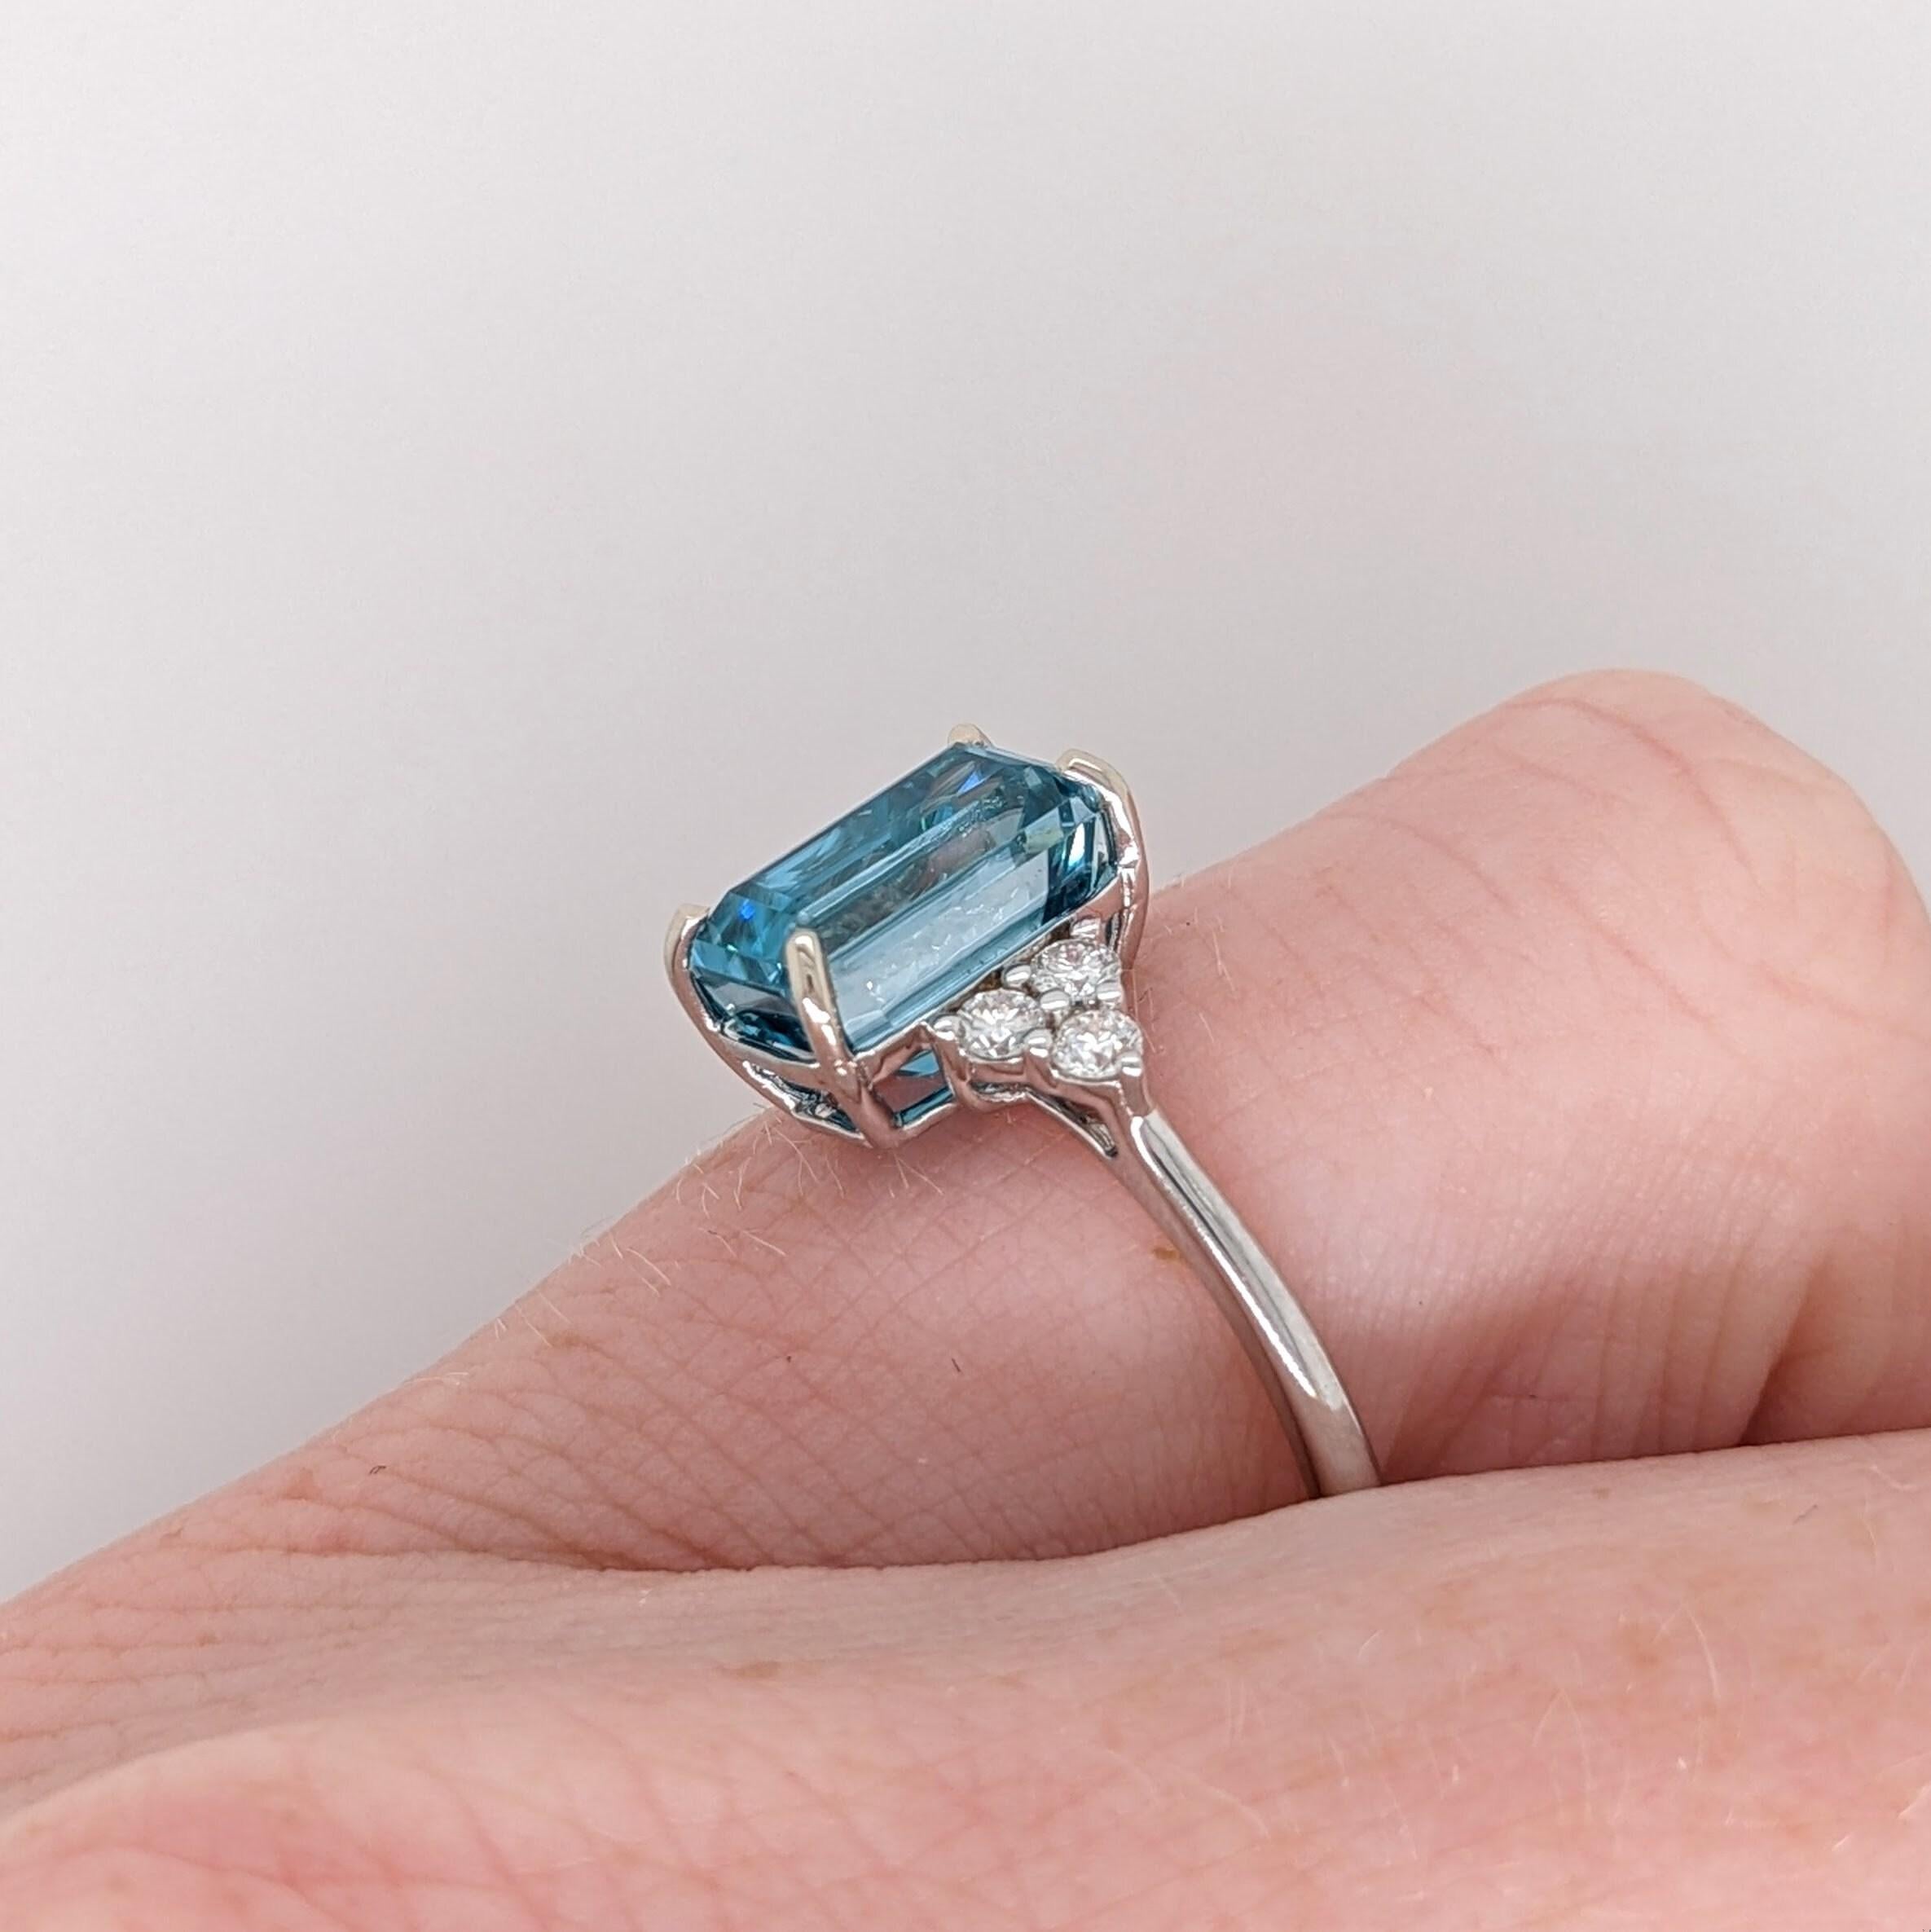 Women's 4.2ct Blue Zircon Ring w Earth Mined Diamonds in Solid 14K White Gold EM 9.5x6mm For Sale